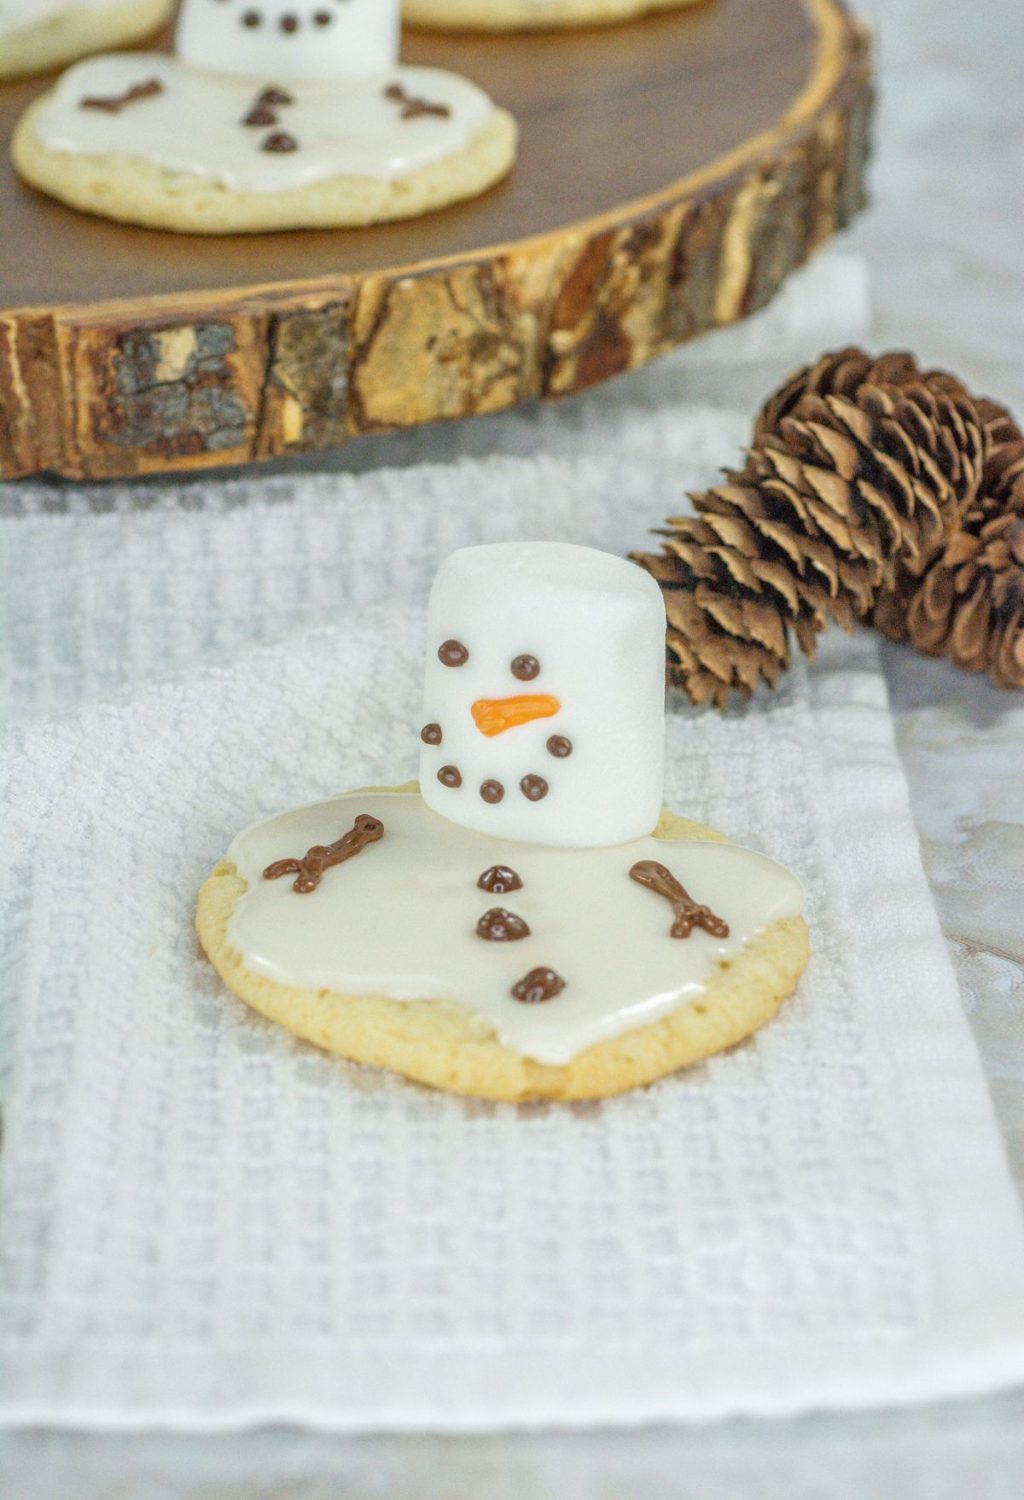 Snowman cookies with icing and pine cones.